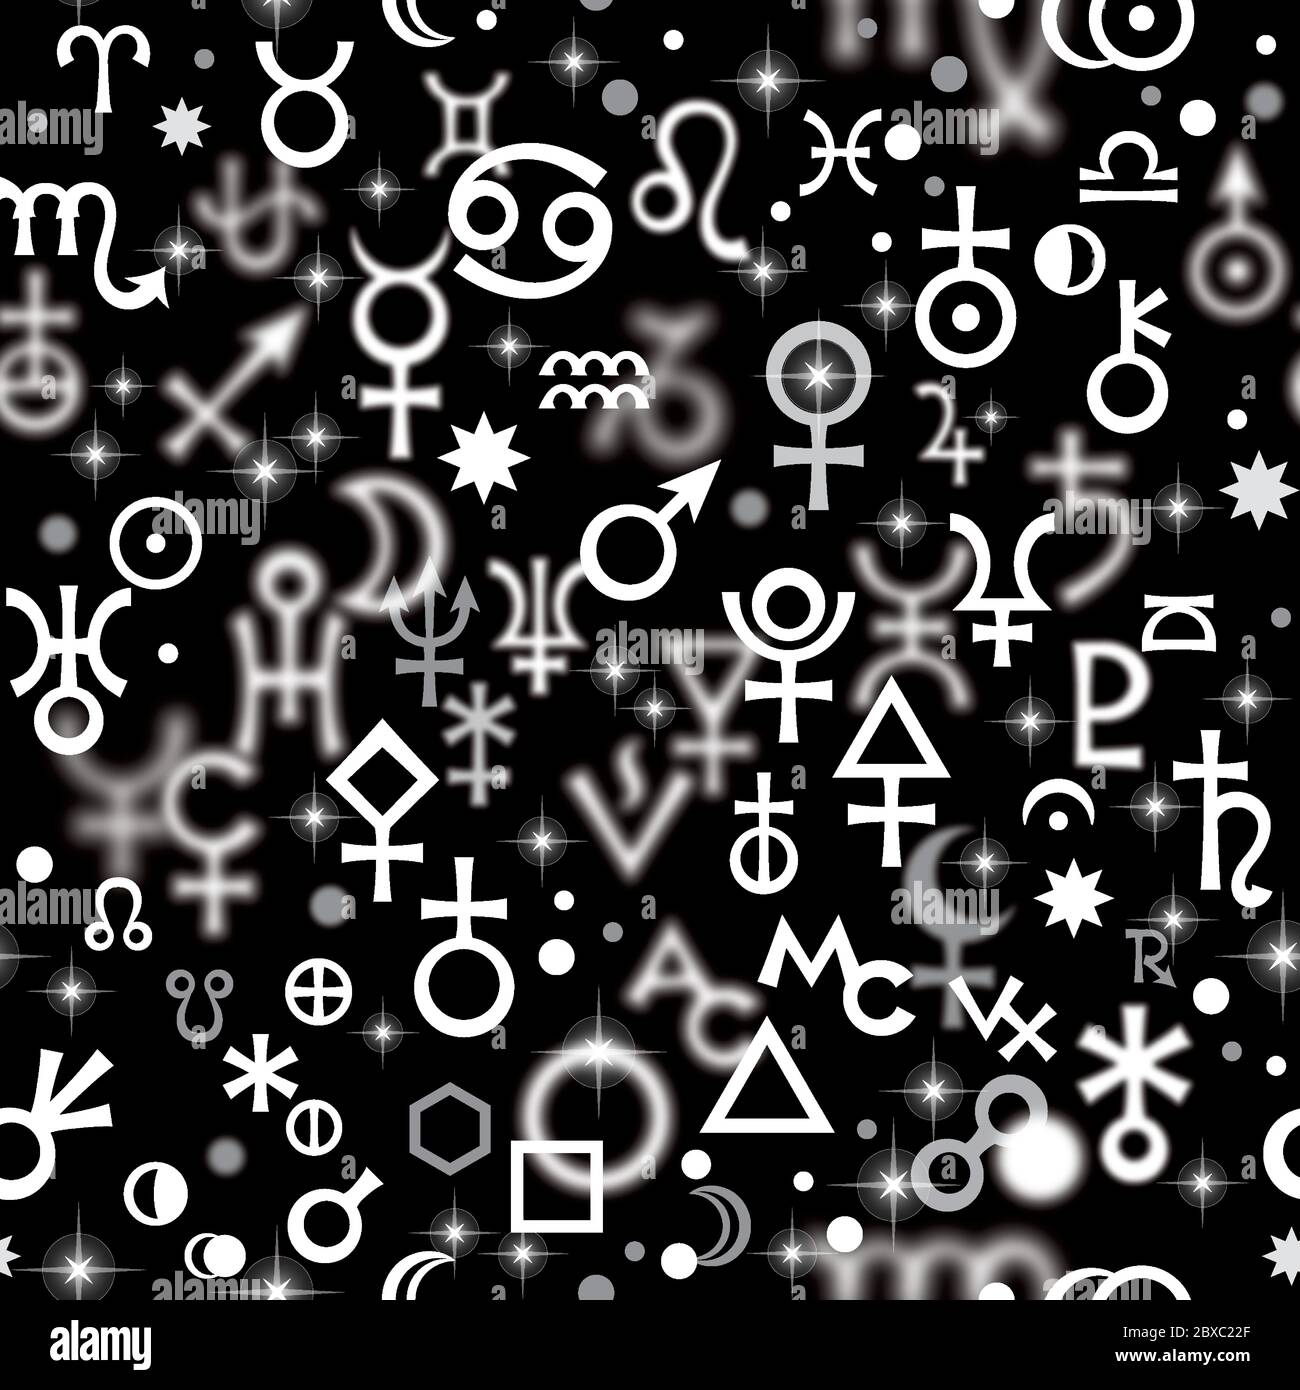 Astrological hieroglyphic signs, Mystic kabbalistic symbols. Chaotic seamless pattern. Stock Vector